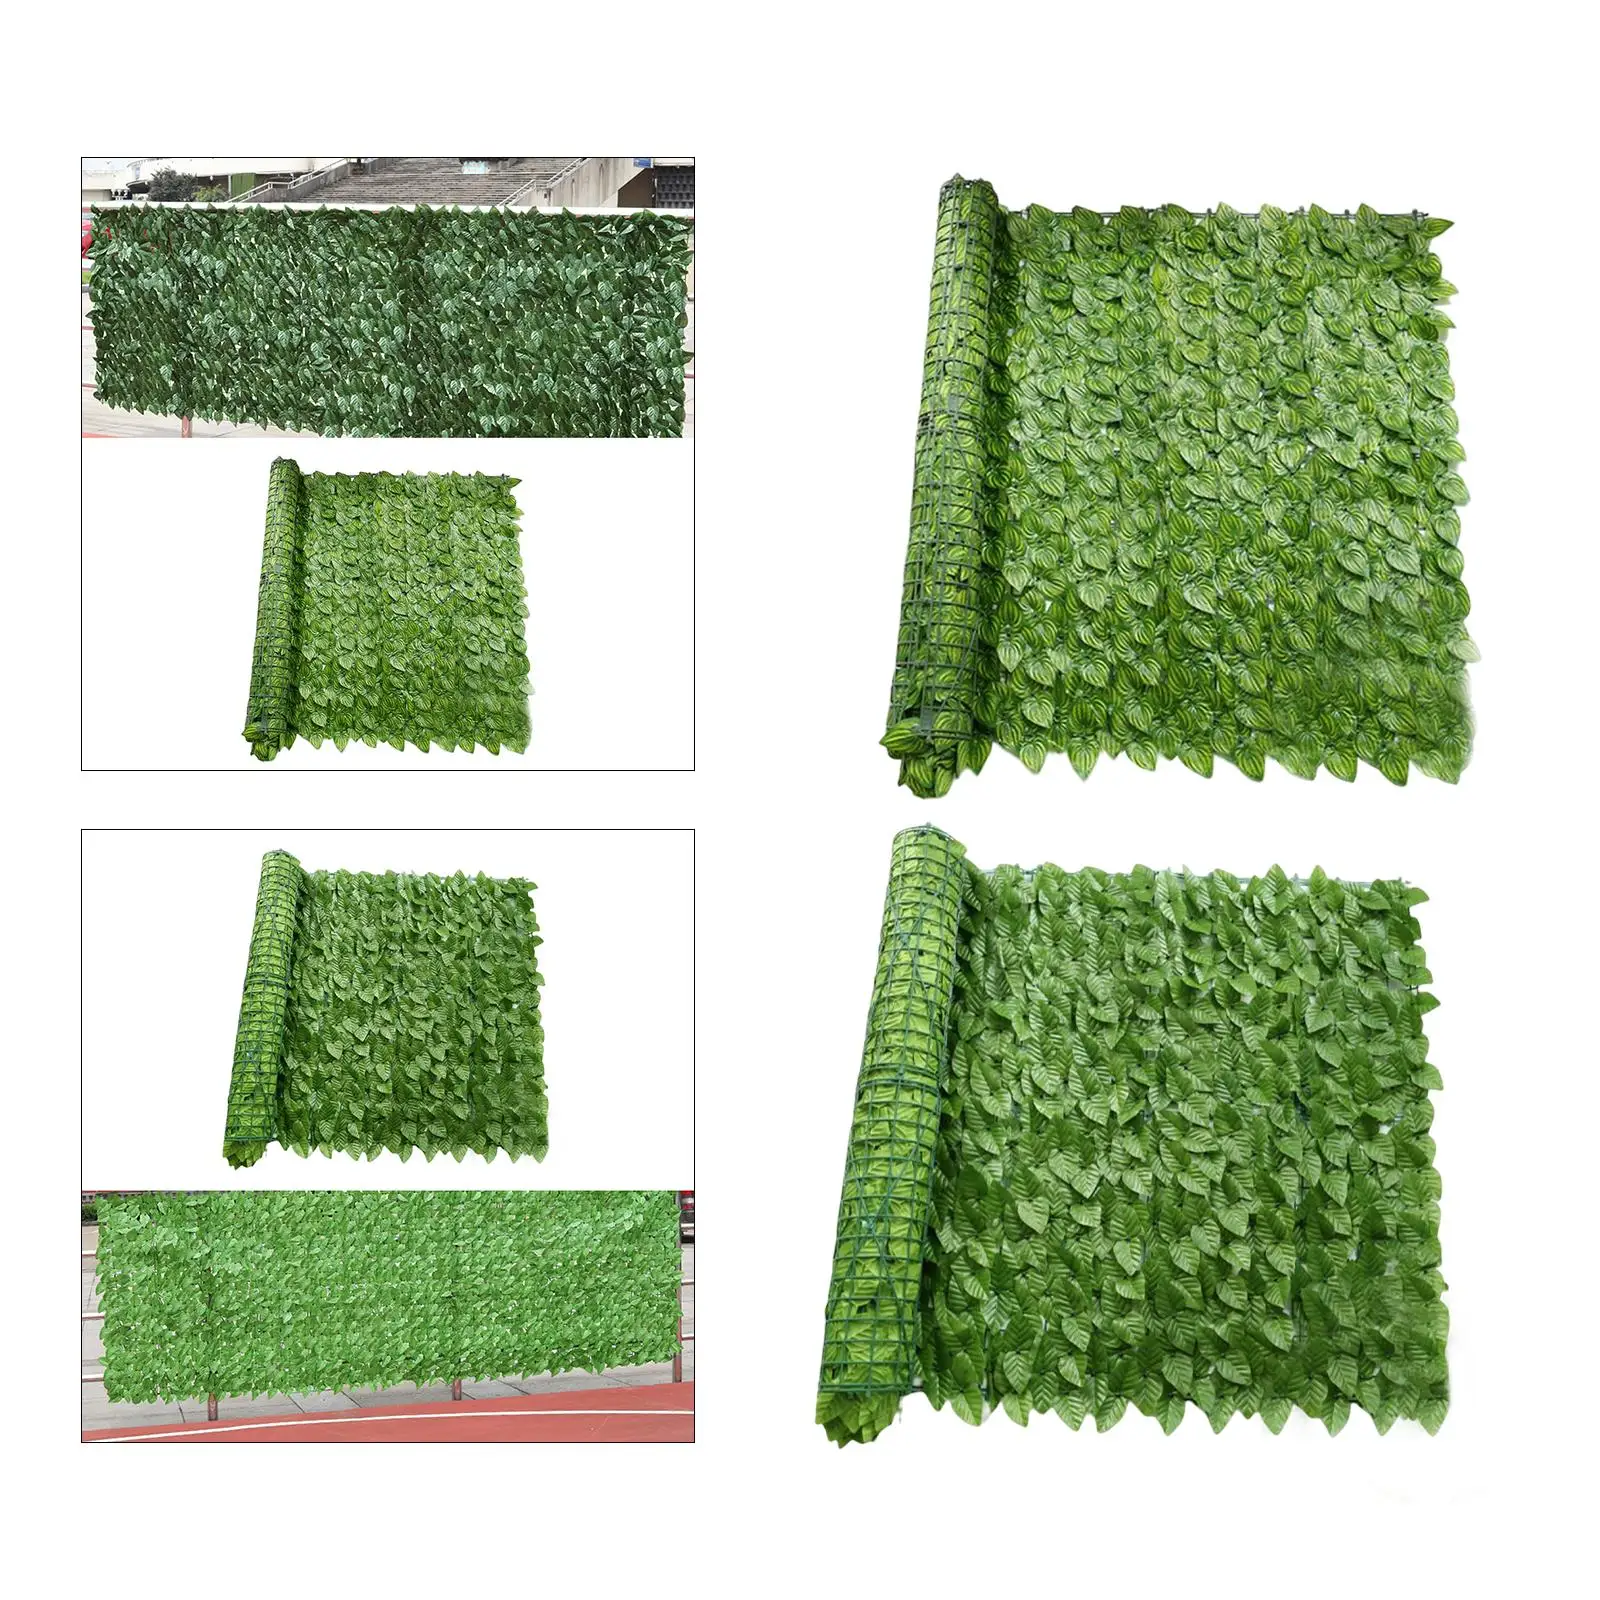 Realistic Artificial Leaf Privacy Fence Screen Ornament 0.5MX1M Vine Forest Green Leaves Greenery Walls for Garden Balcony Yard